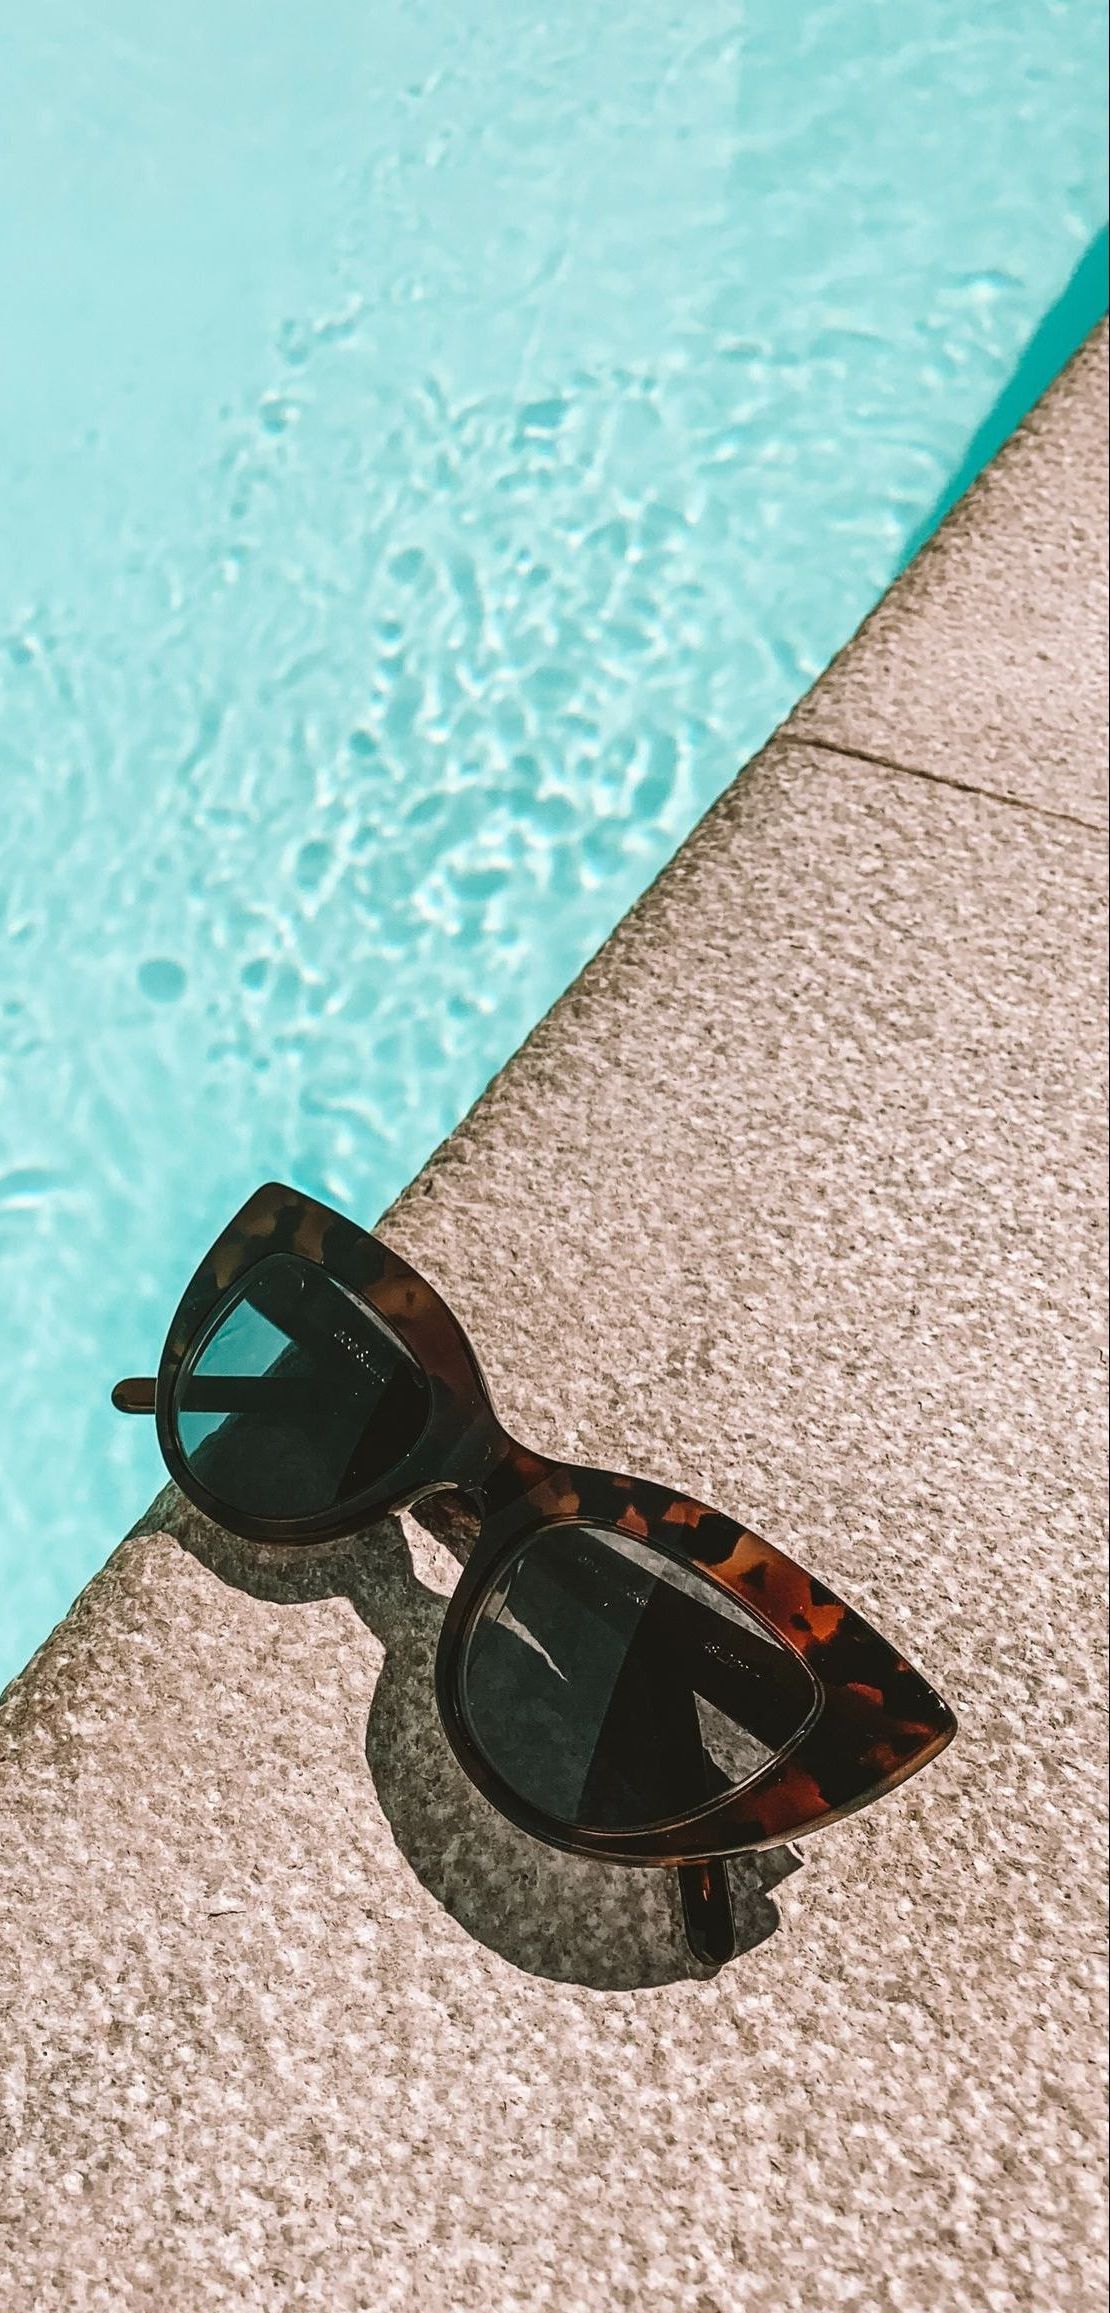 sunglasses by a pool